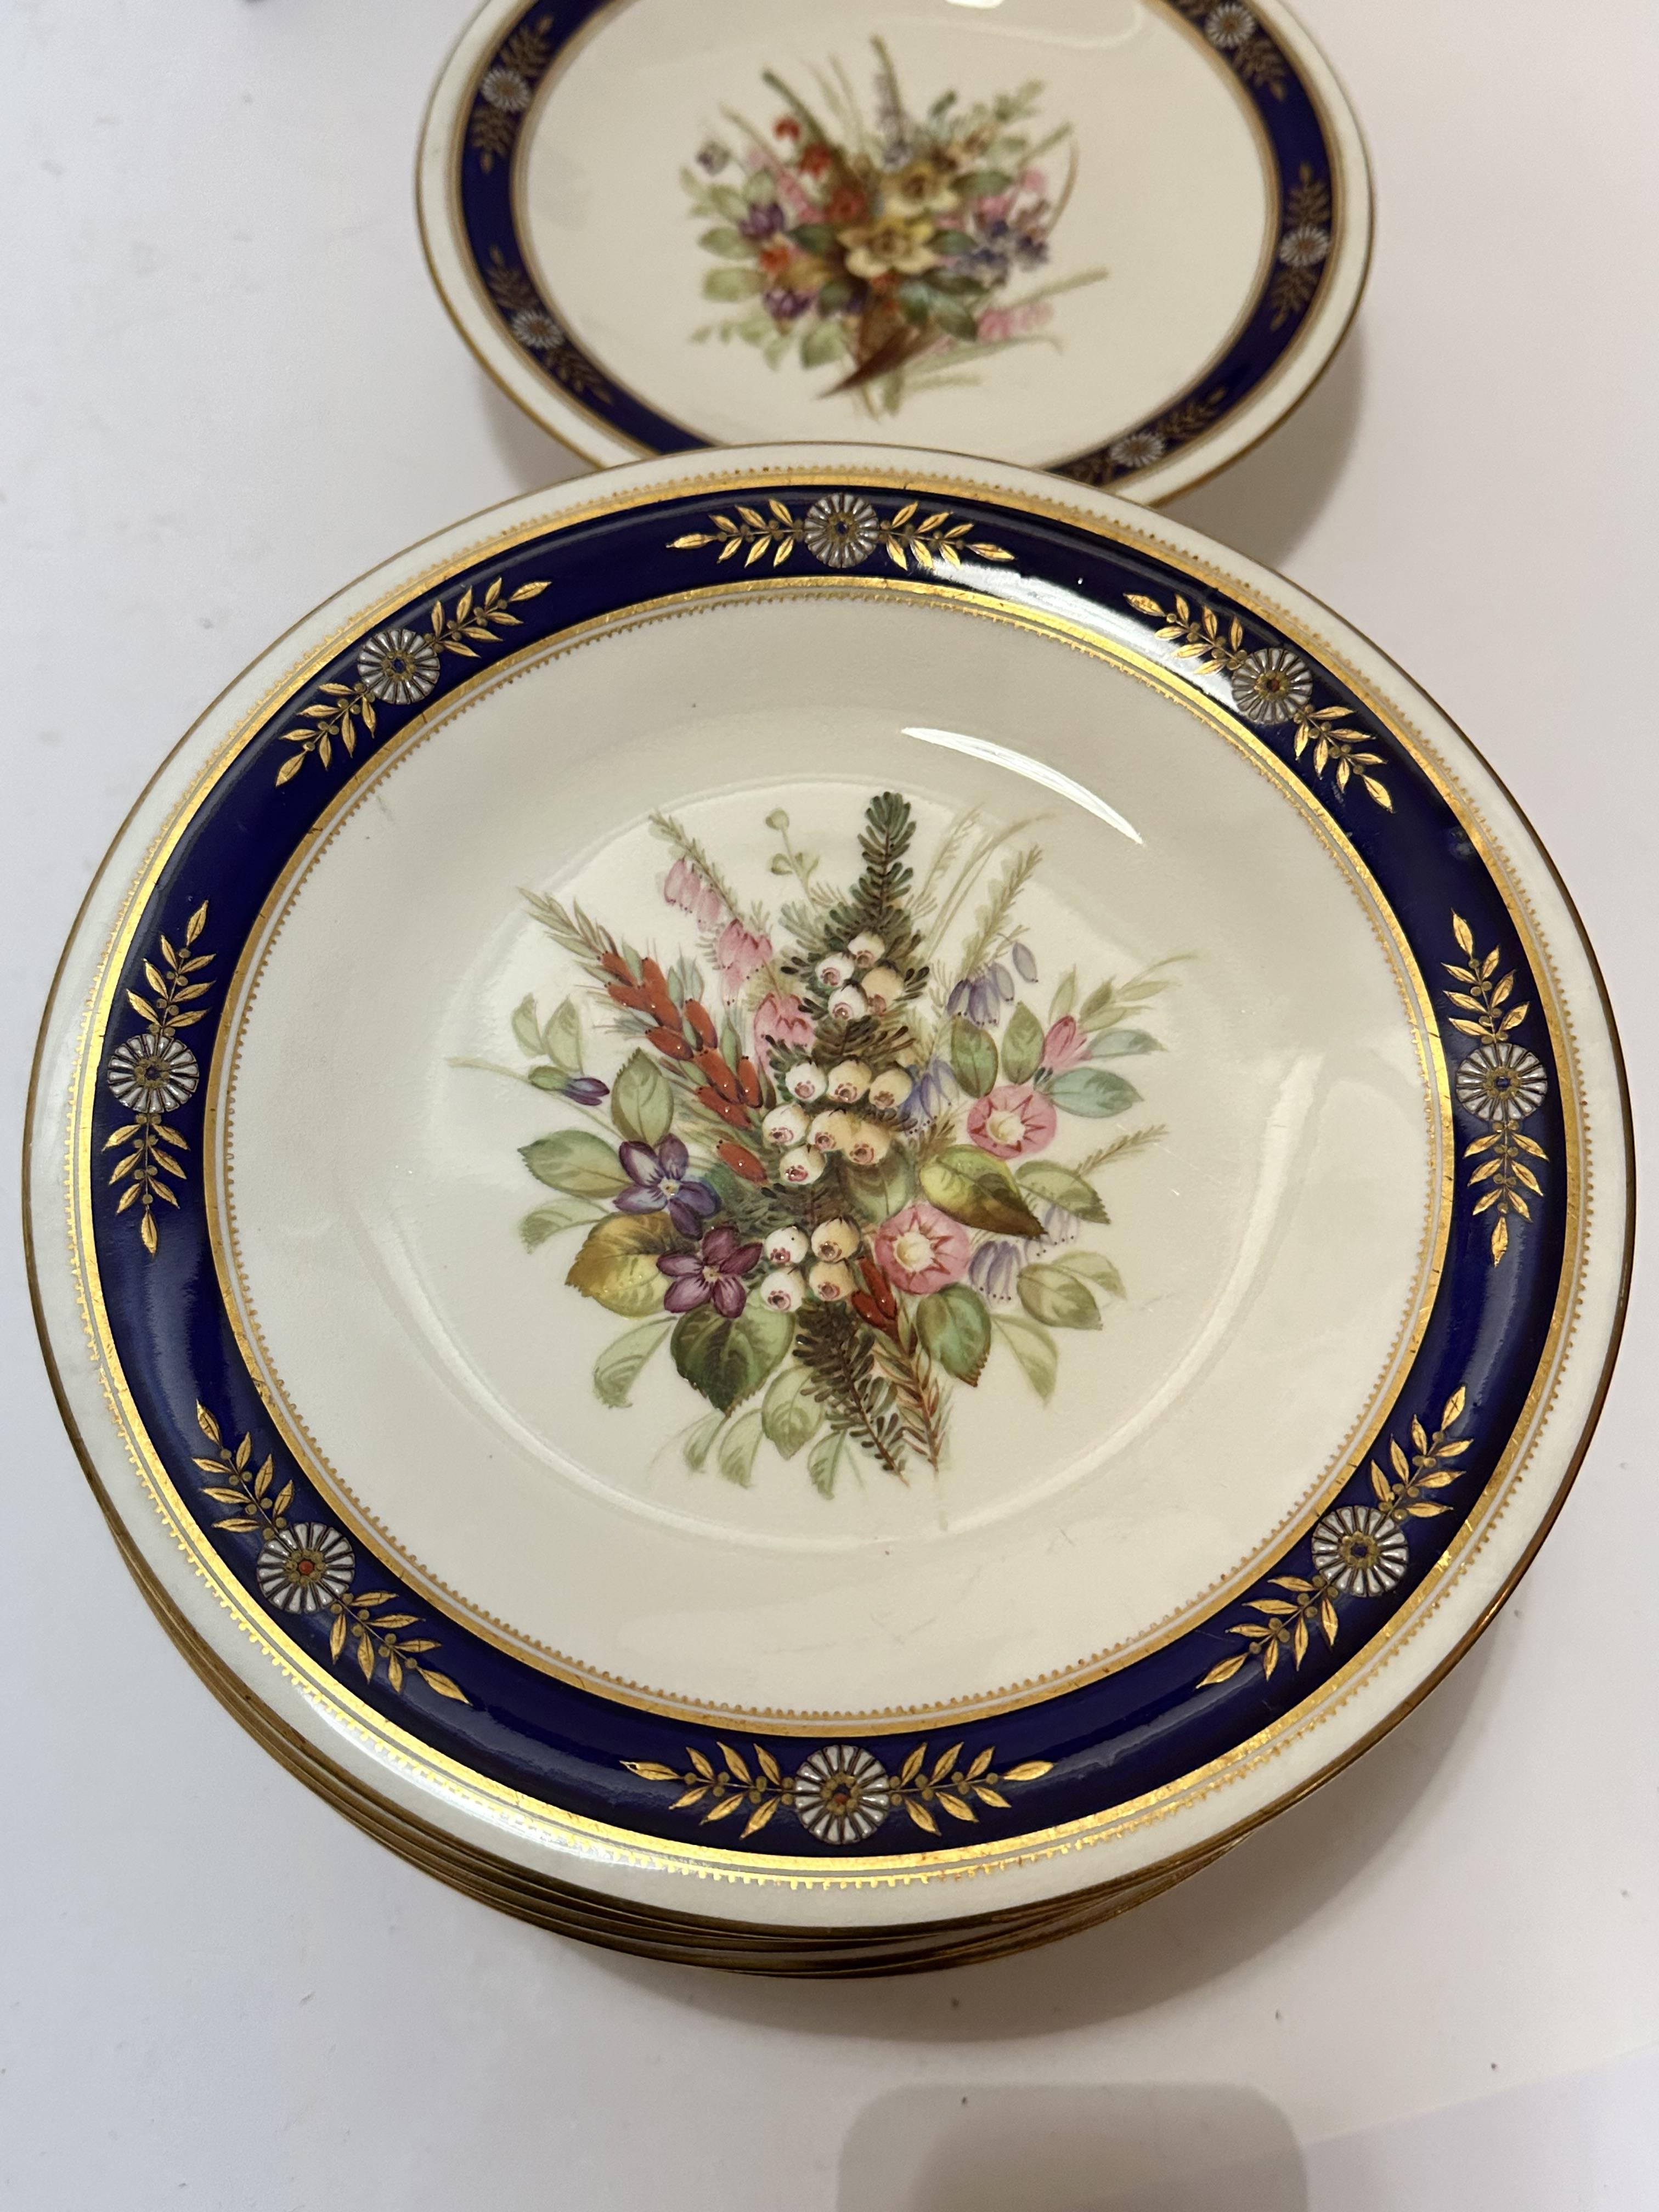 An Edwardian Royal Worcester nineteen piece dessert service including three stands, (5cm x 23cm) and - Image 20 of 29